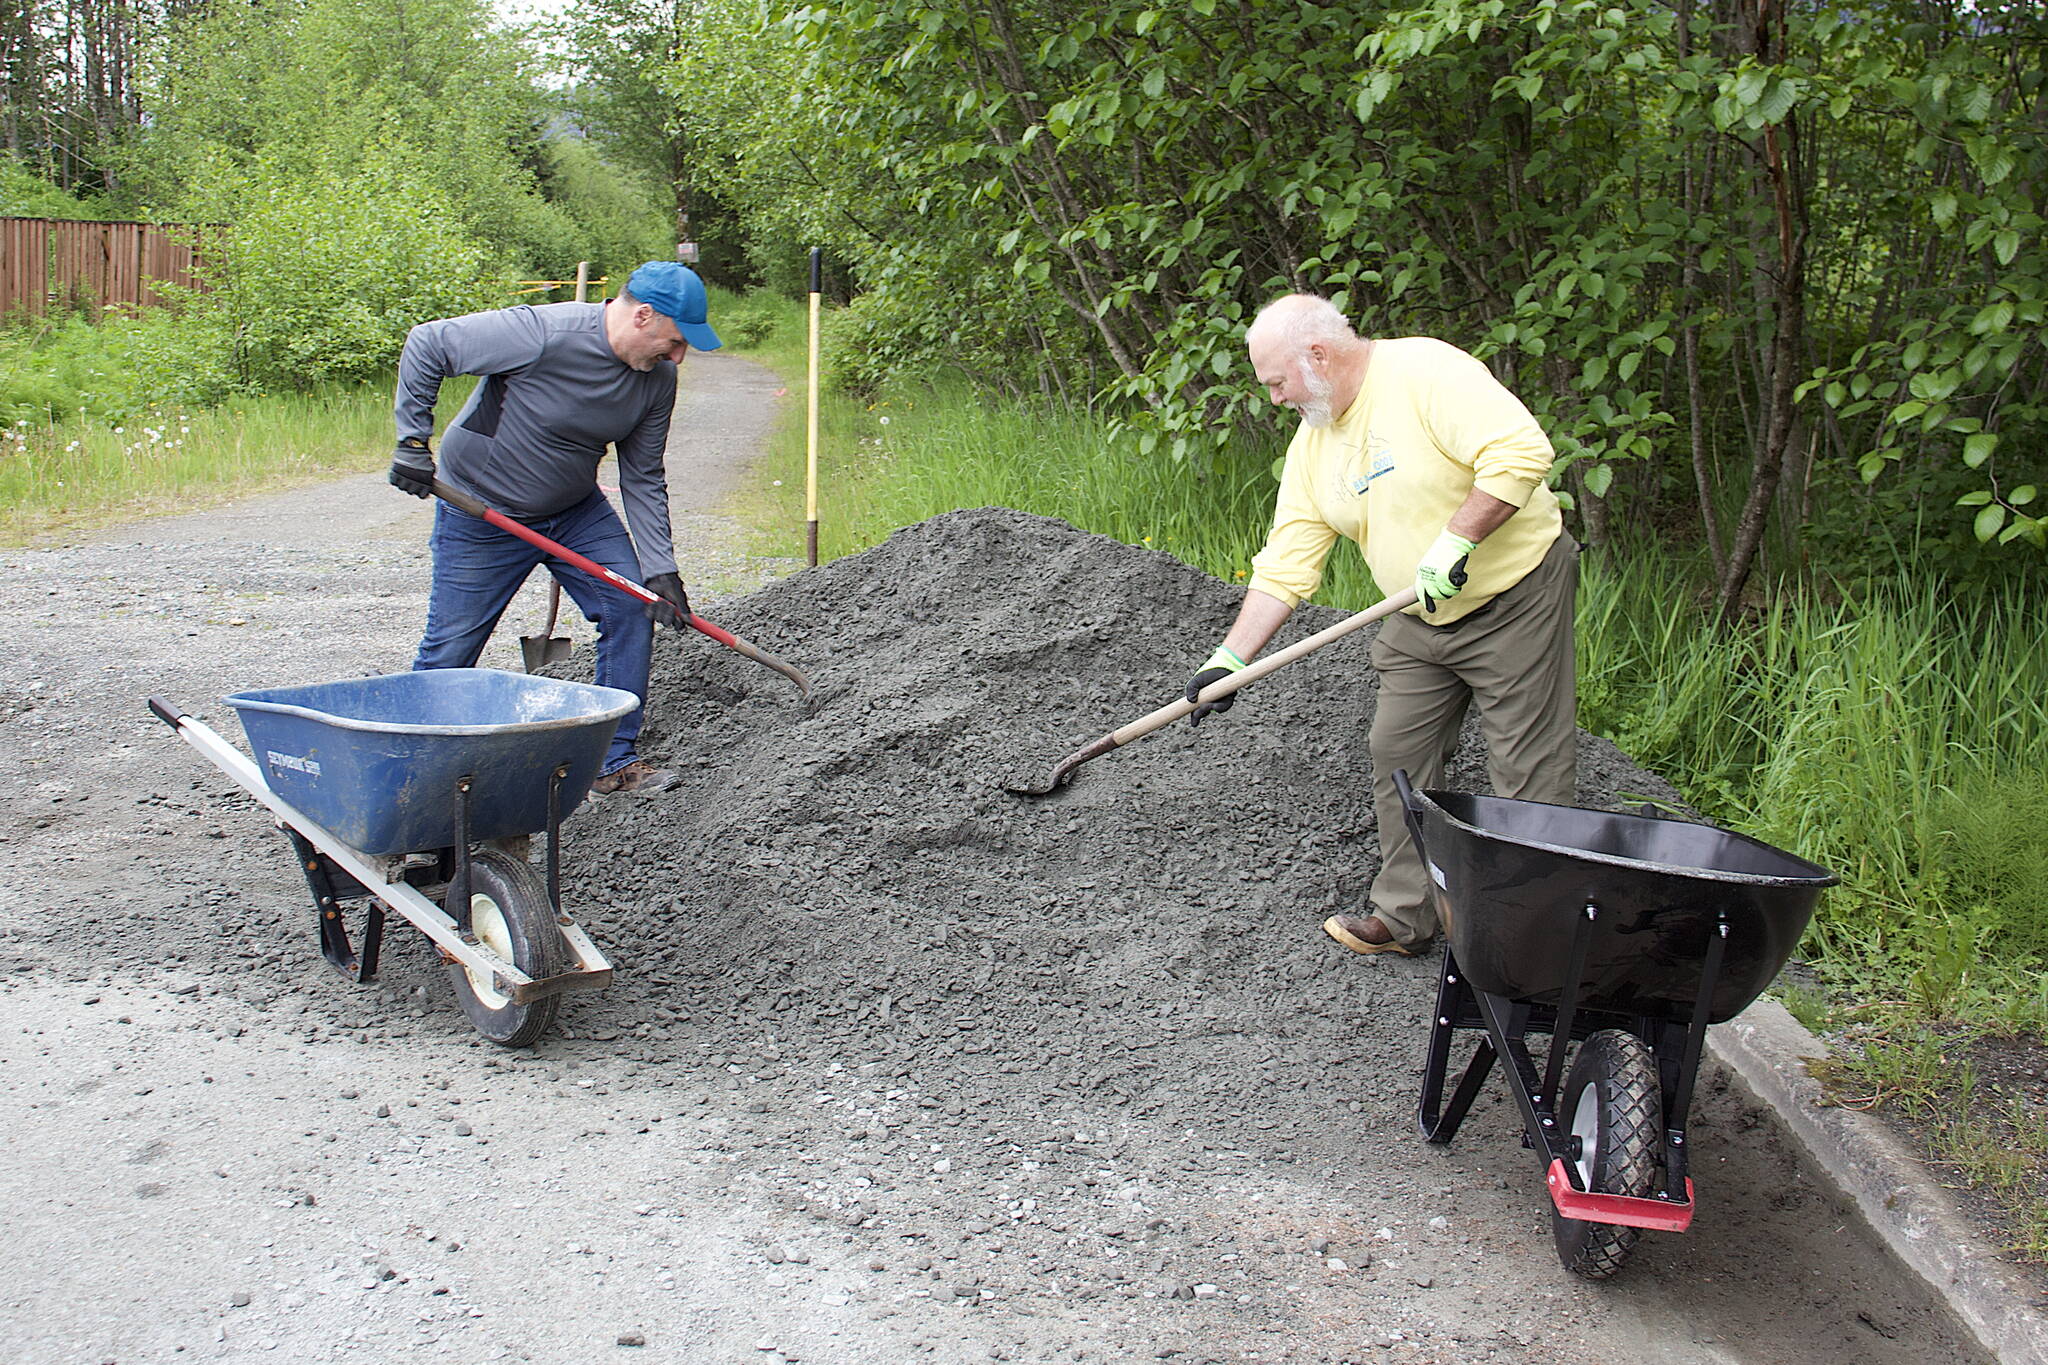 Mark Pusich, left, president of Trail Mix, and Ron Bressette, the non-profit group’s vice president, shovel gravel into wheelbarrows so it can be spread on the Kingfisher Pond Loop Trail on Saturday. The gravel is a special type that expands and retains its shape during wet weather, thus preventing washouts. (Mark Sabatini / Juneau Empire)